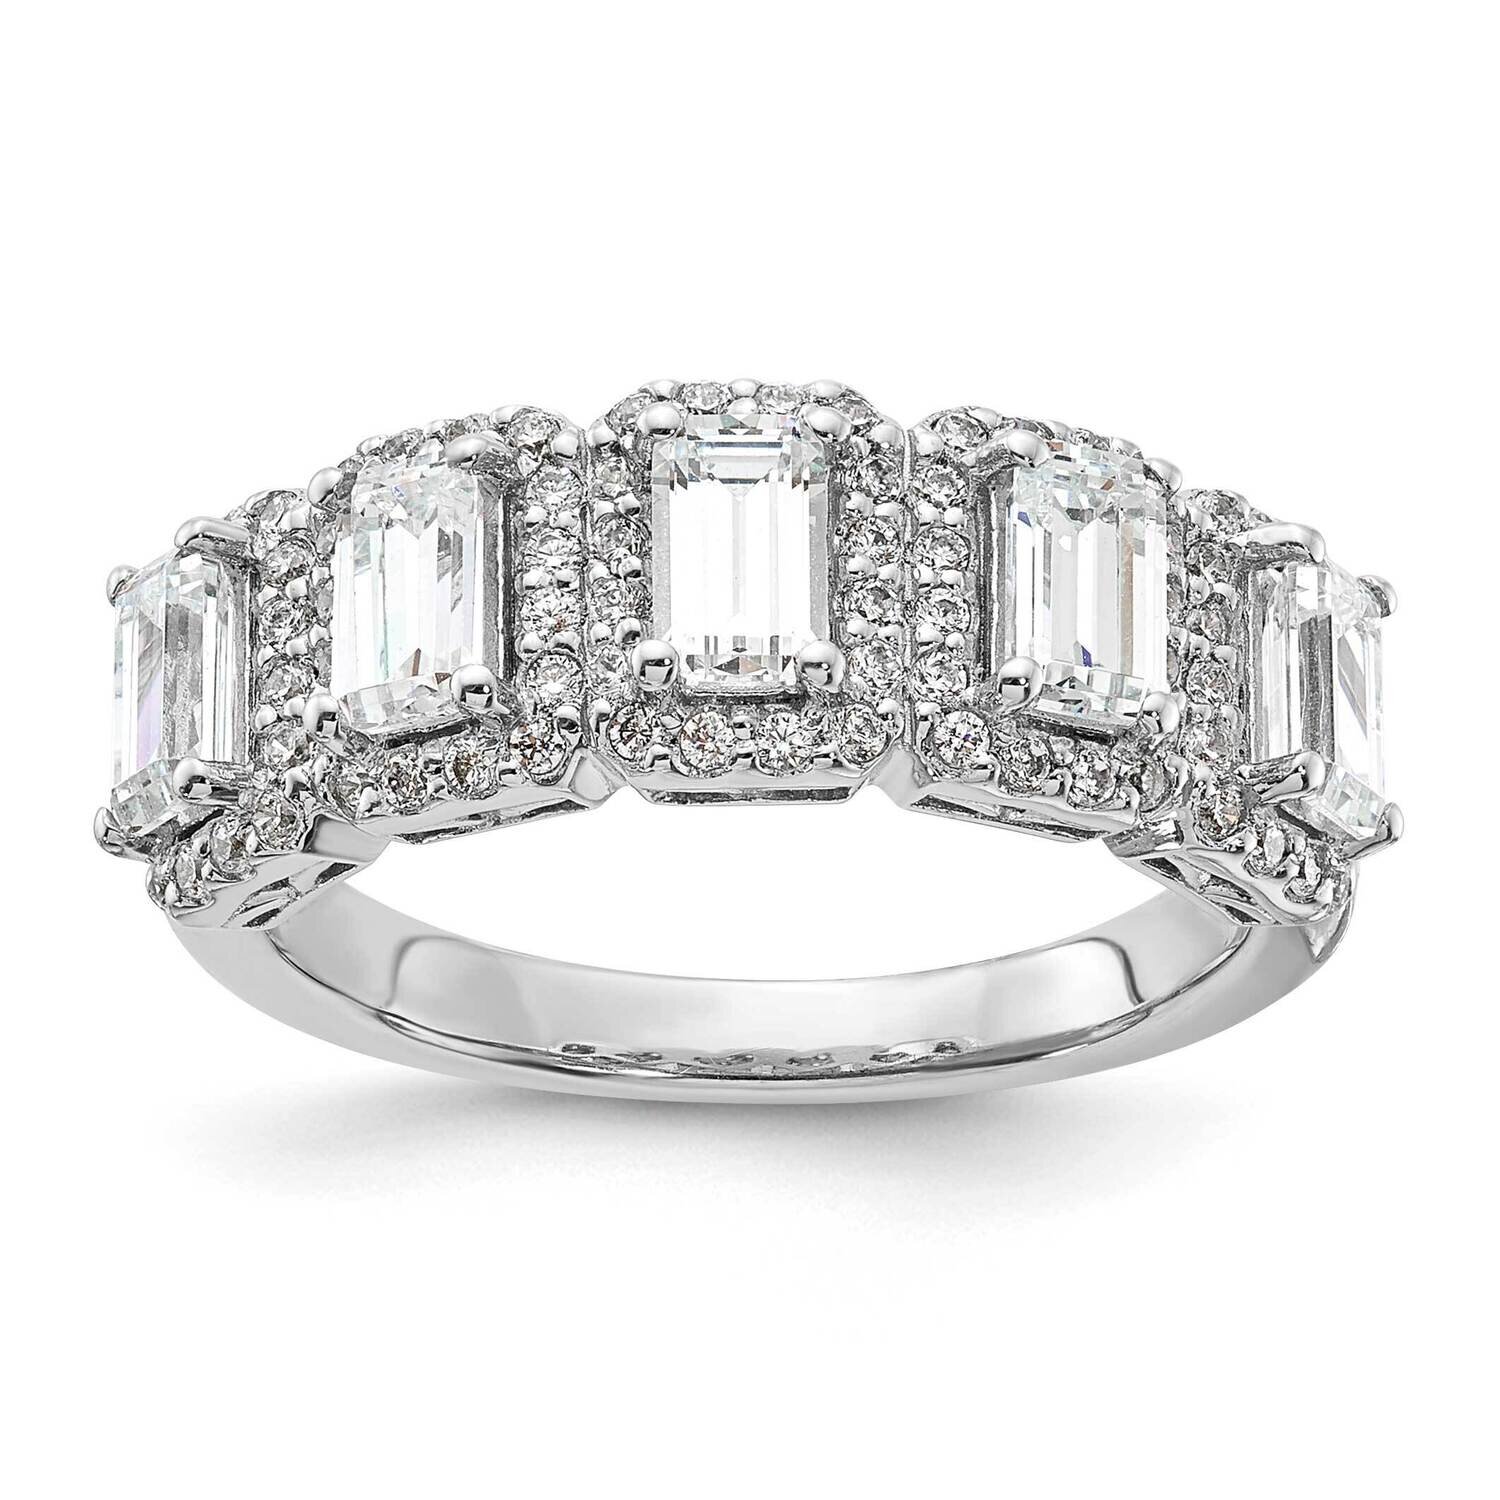 Sterling Silver Rhodium-plated Diamonore 5 Stone Baguette Halo Ring RLS6623/DAWT-SSA-7